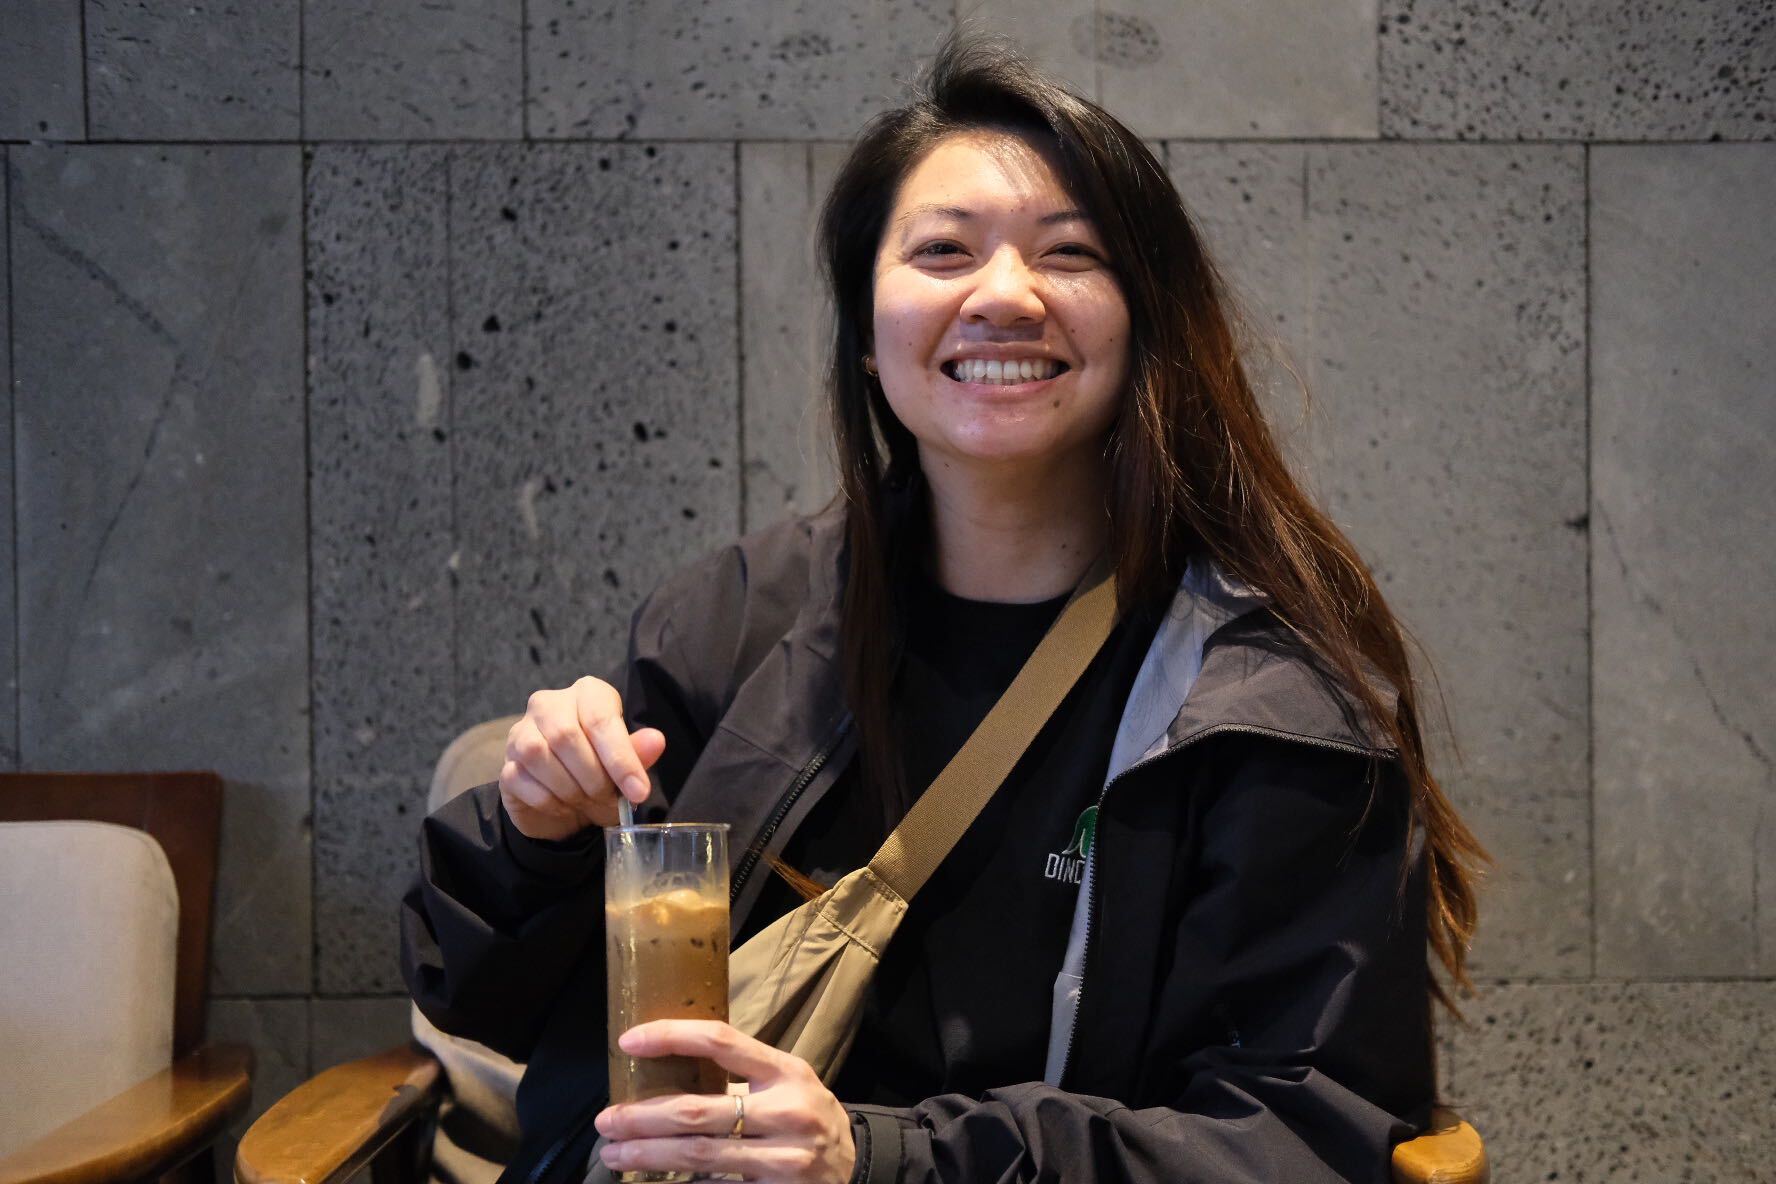 Jenny smiling and enjoying an iced coffee.